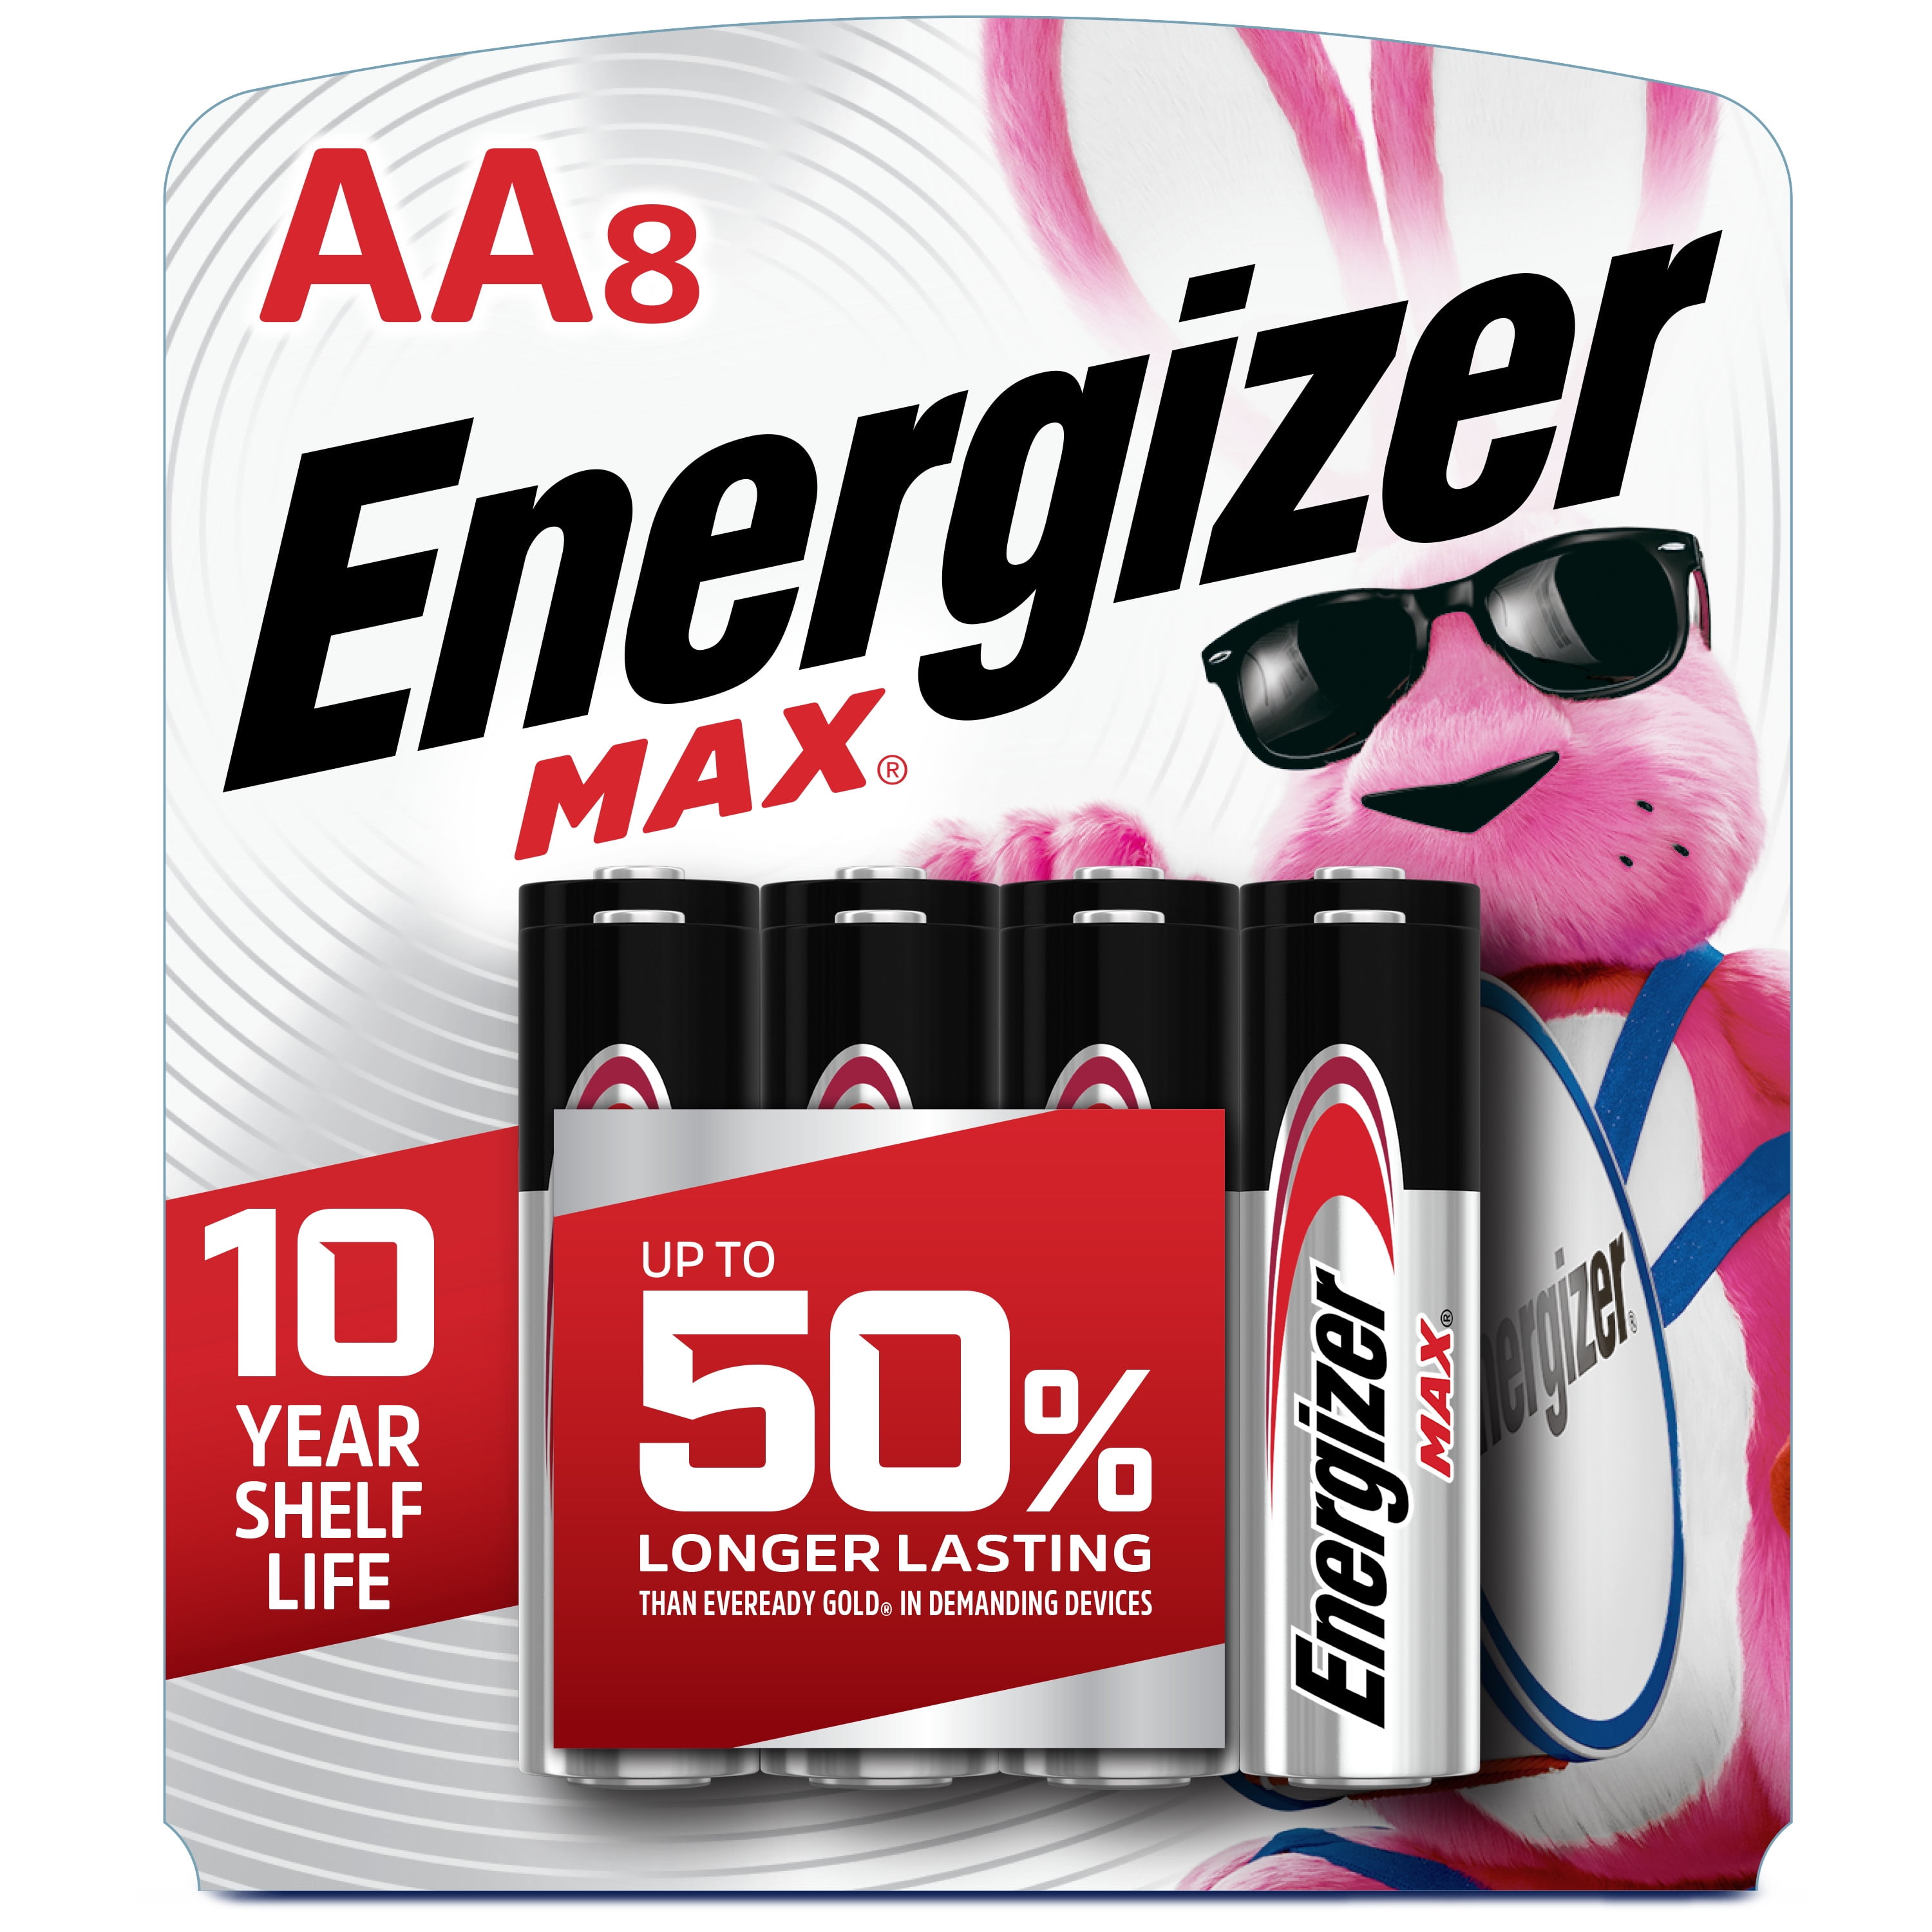 Energizer MAX AA Batteries - Pack of 8